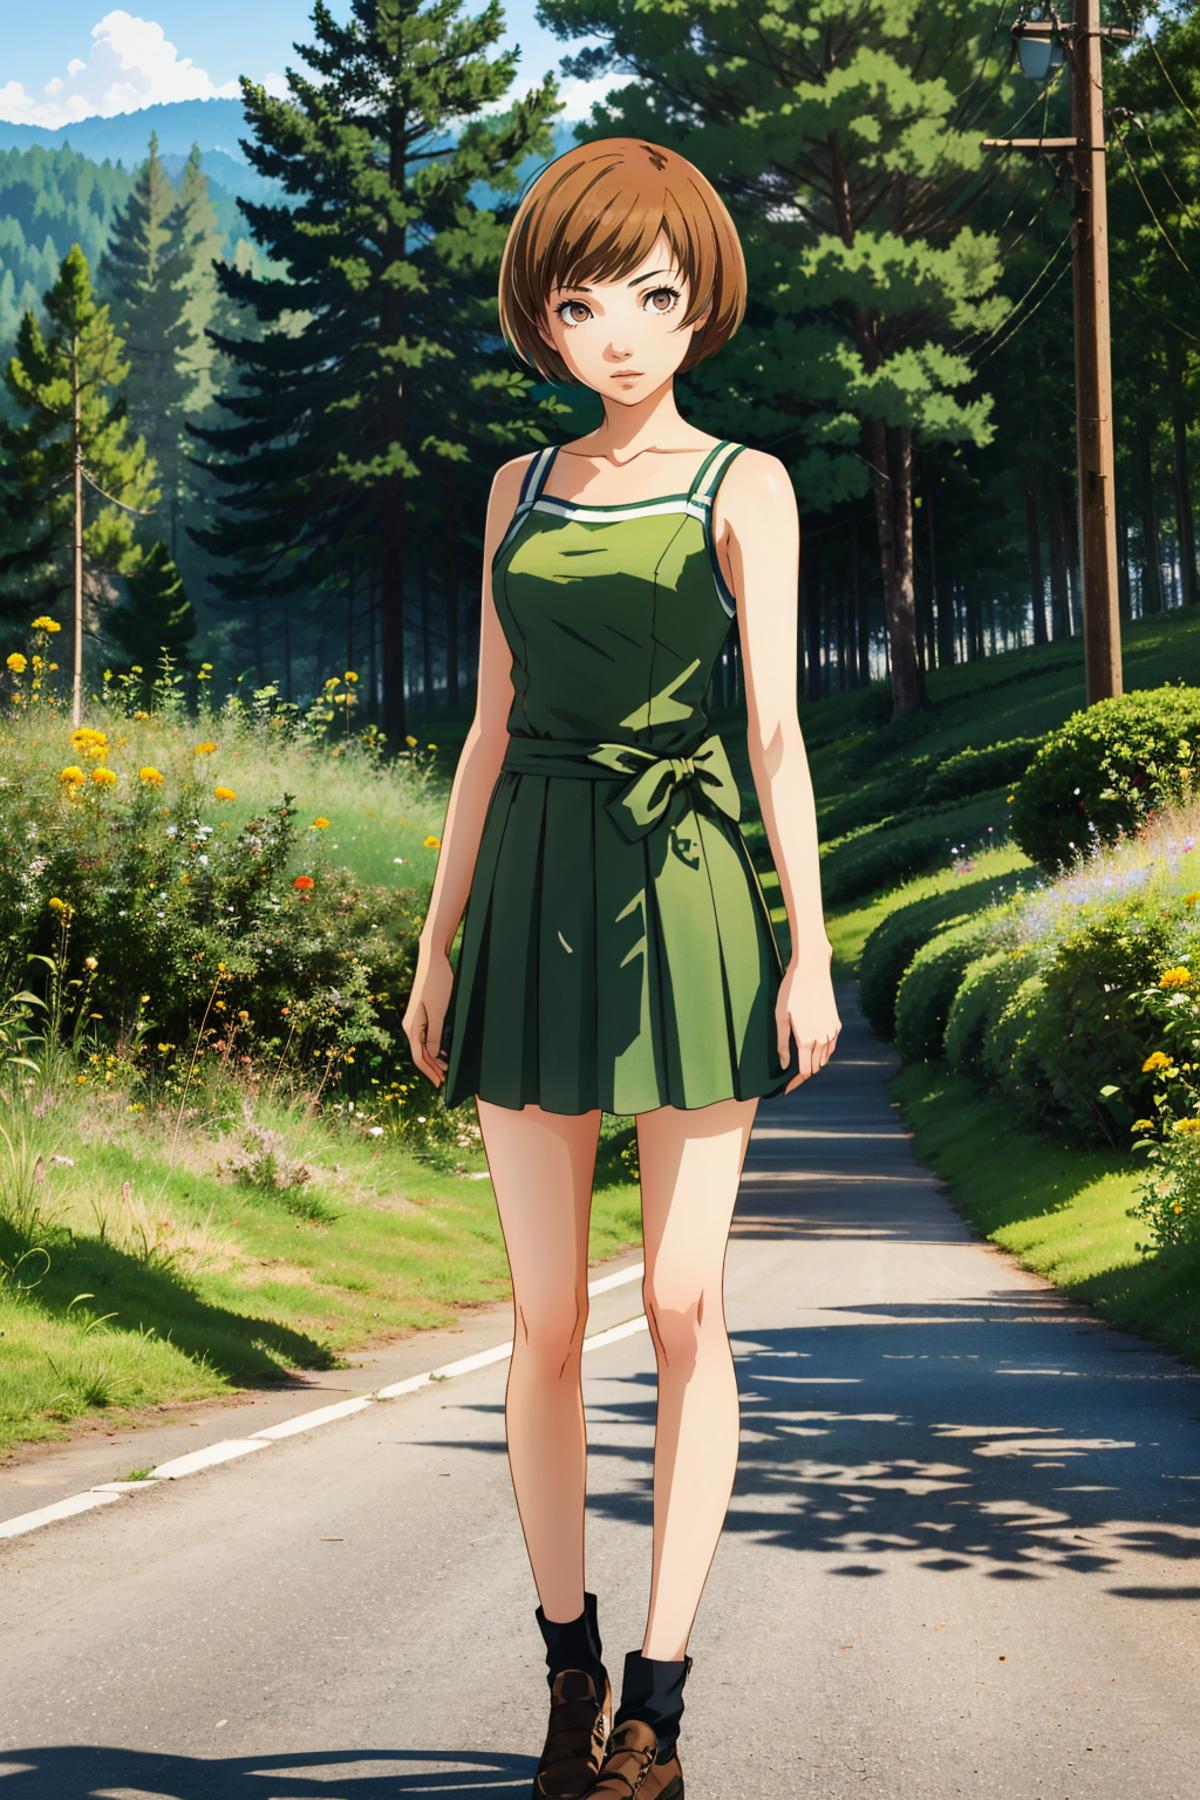 Chie from Persona 4 image by BloodRedKittie